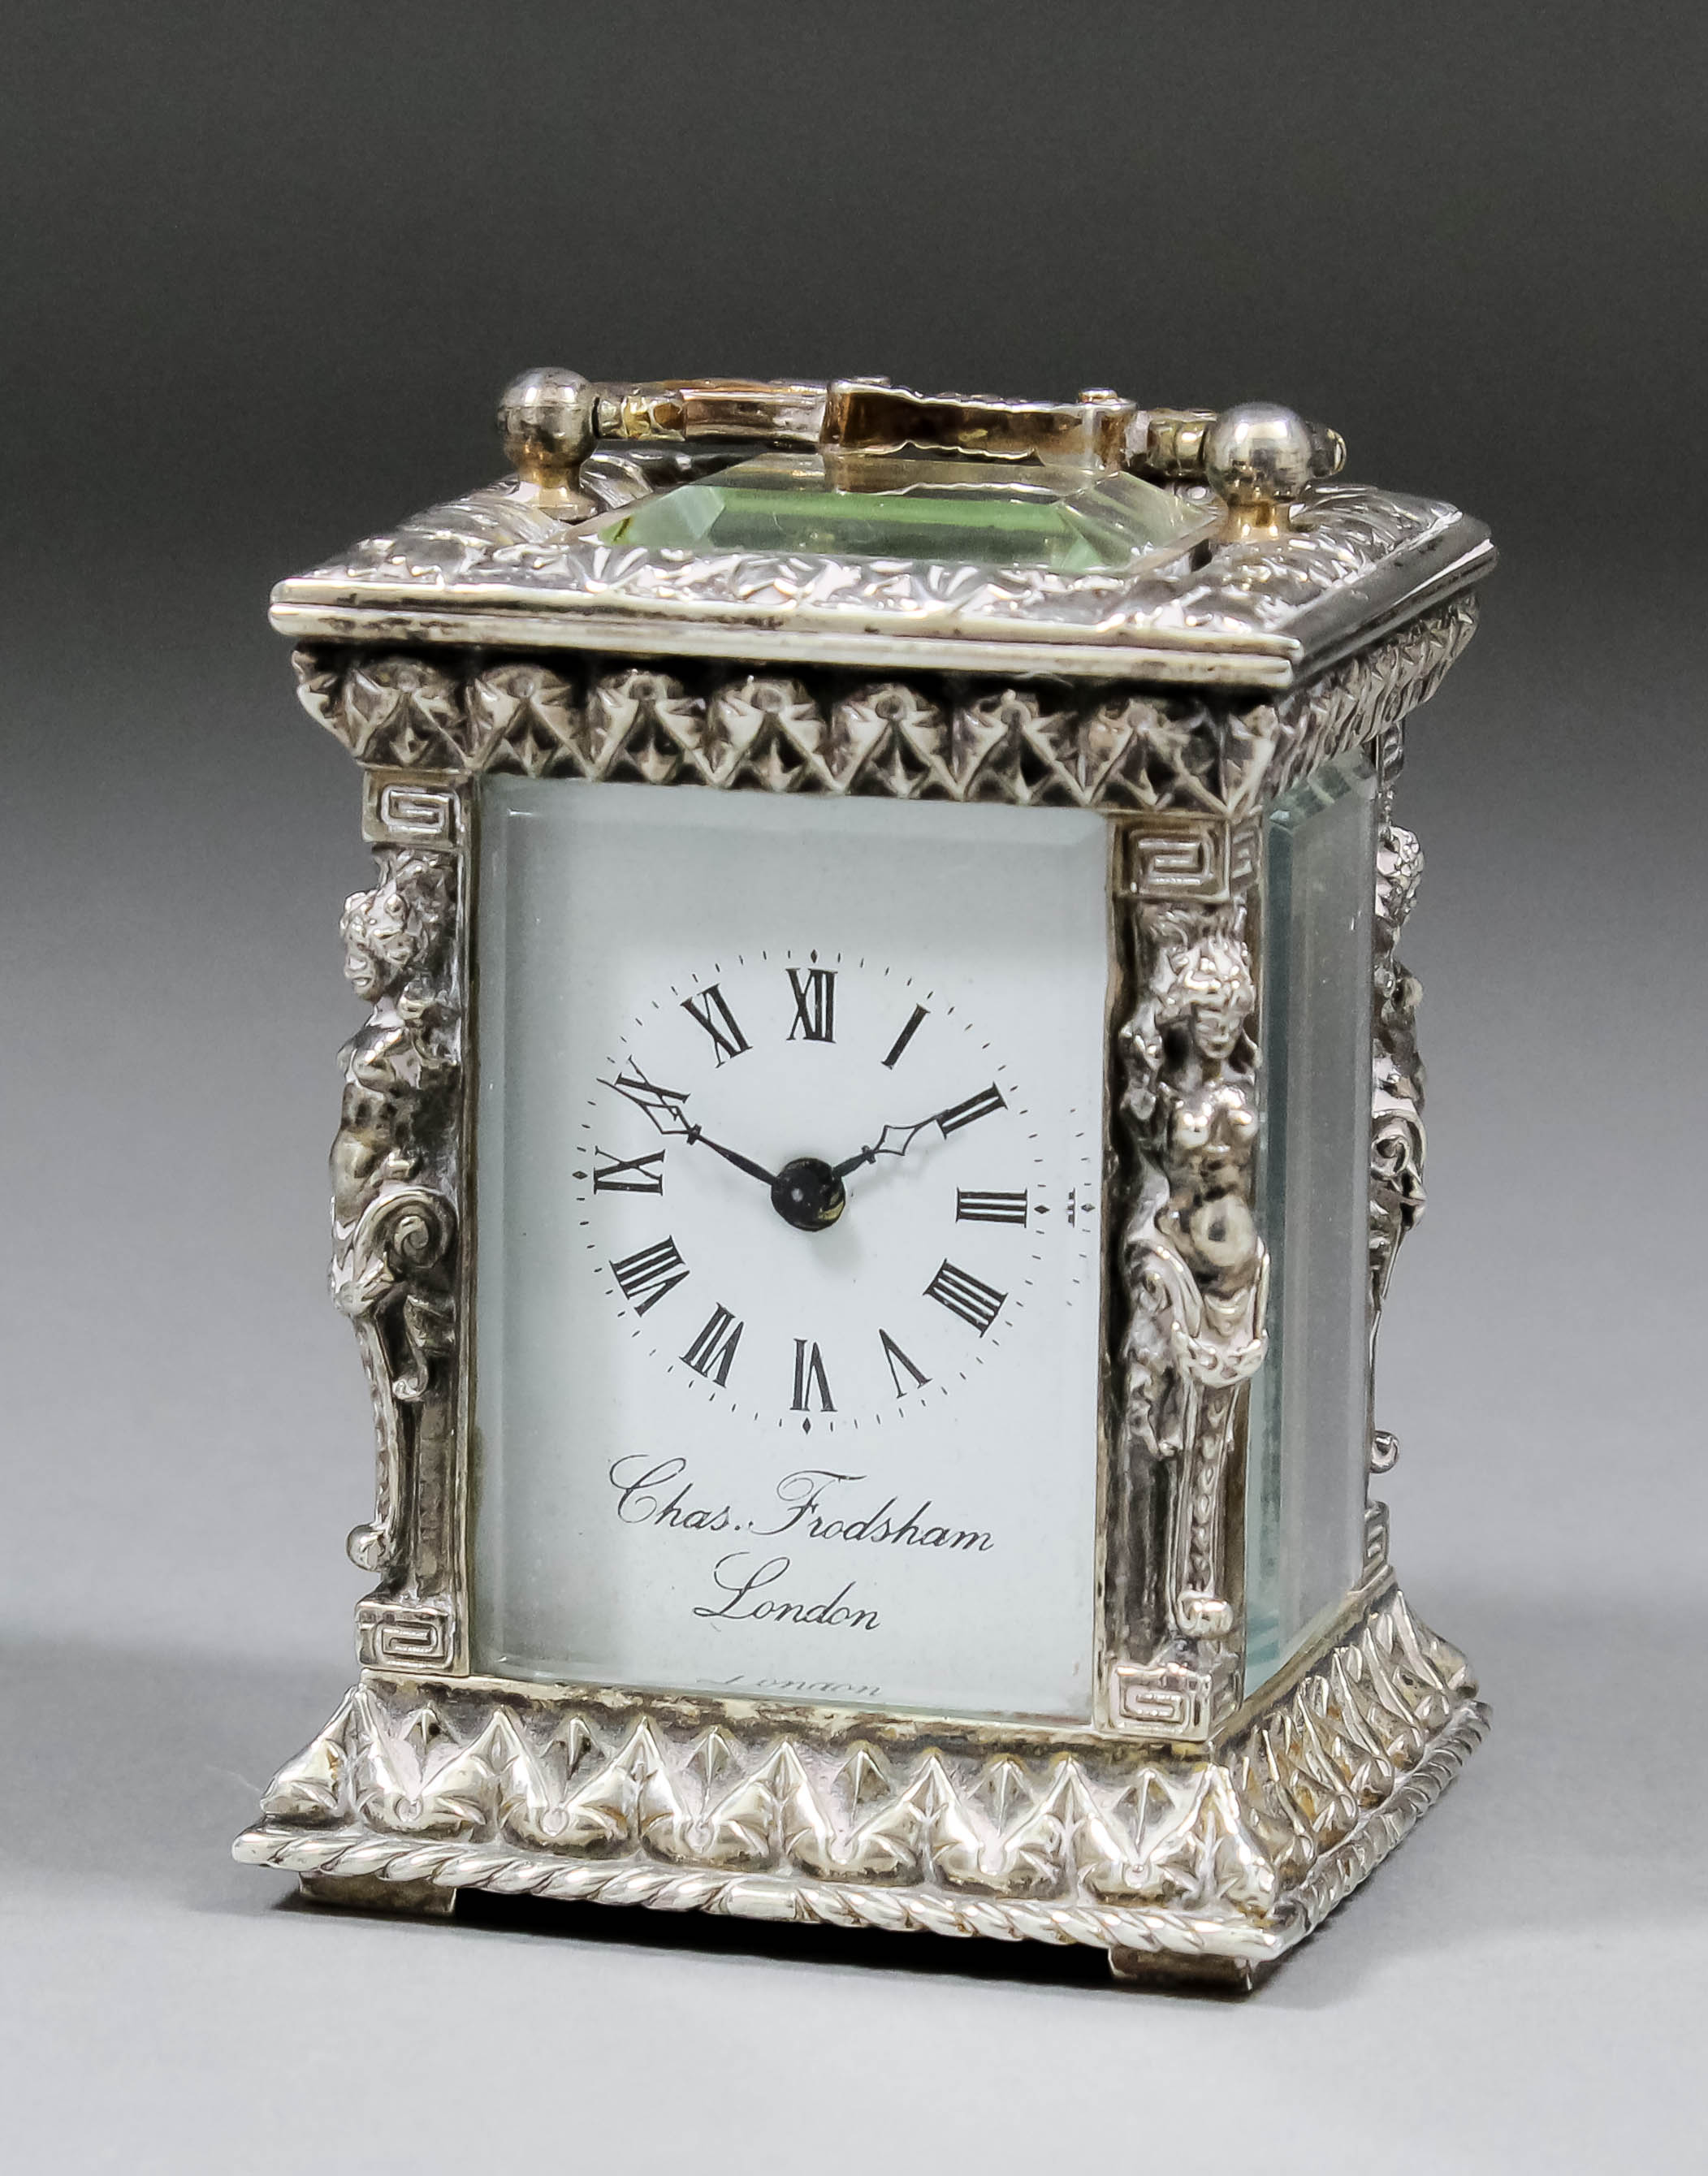 An Elizabeth II cast silver cased miniature carriage timepiece by Charles Frodsham of London, the